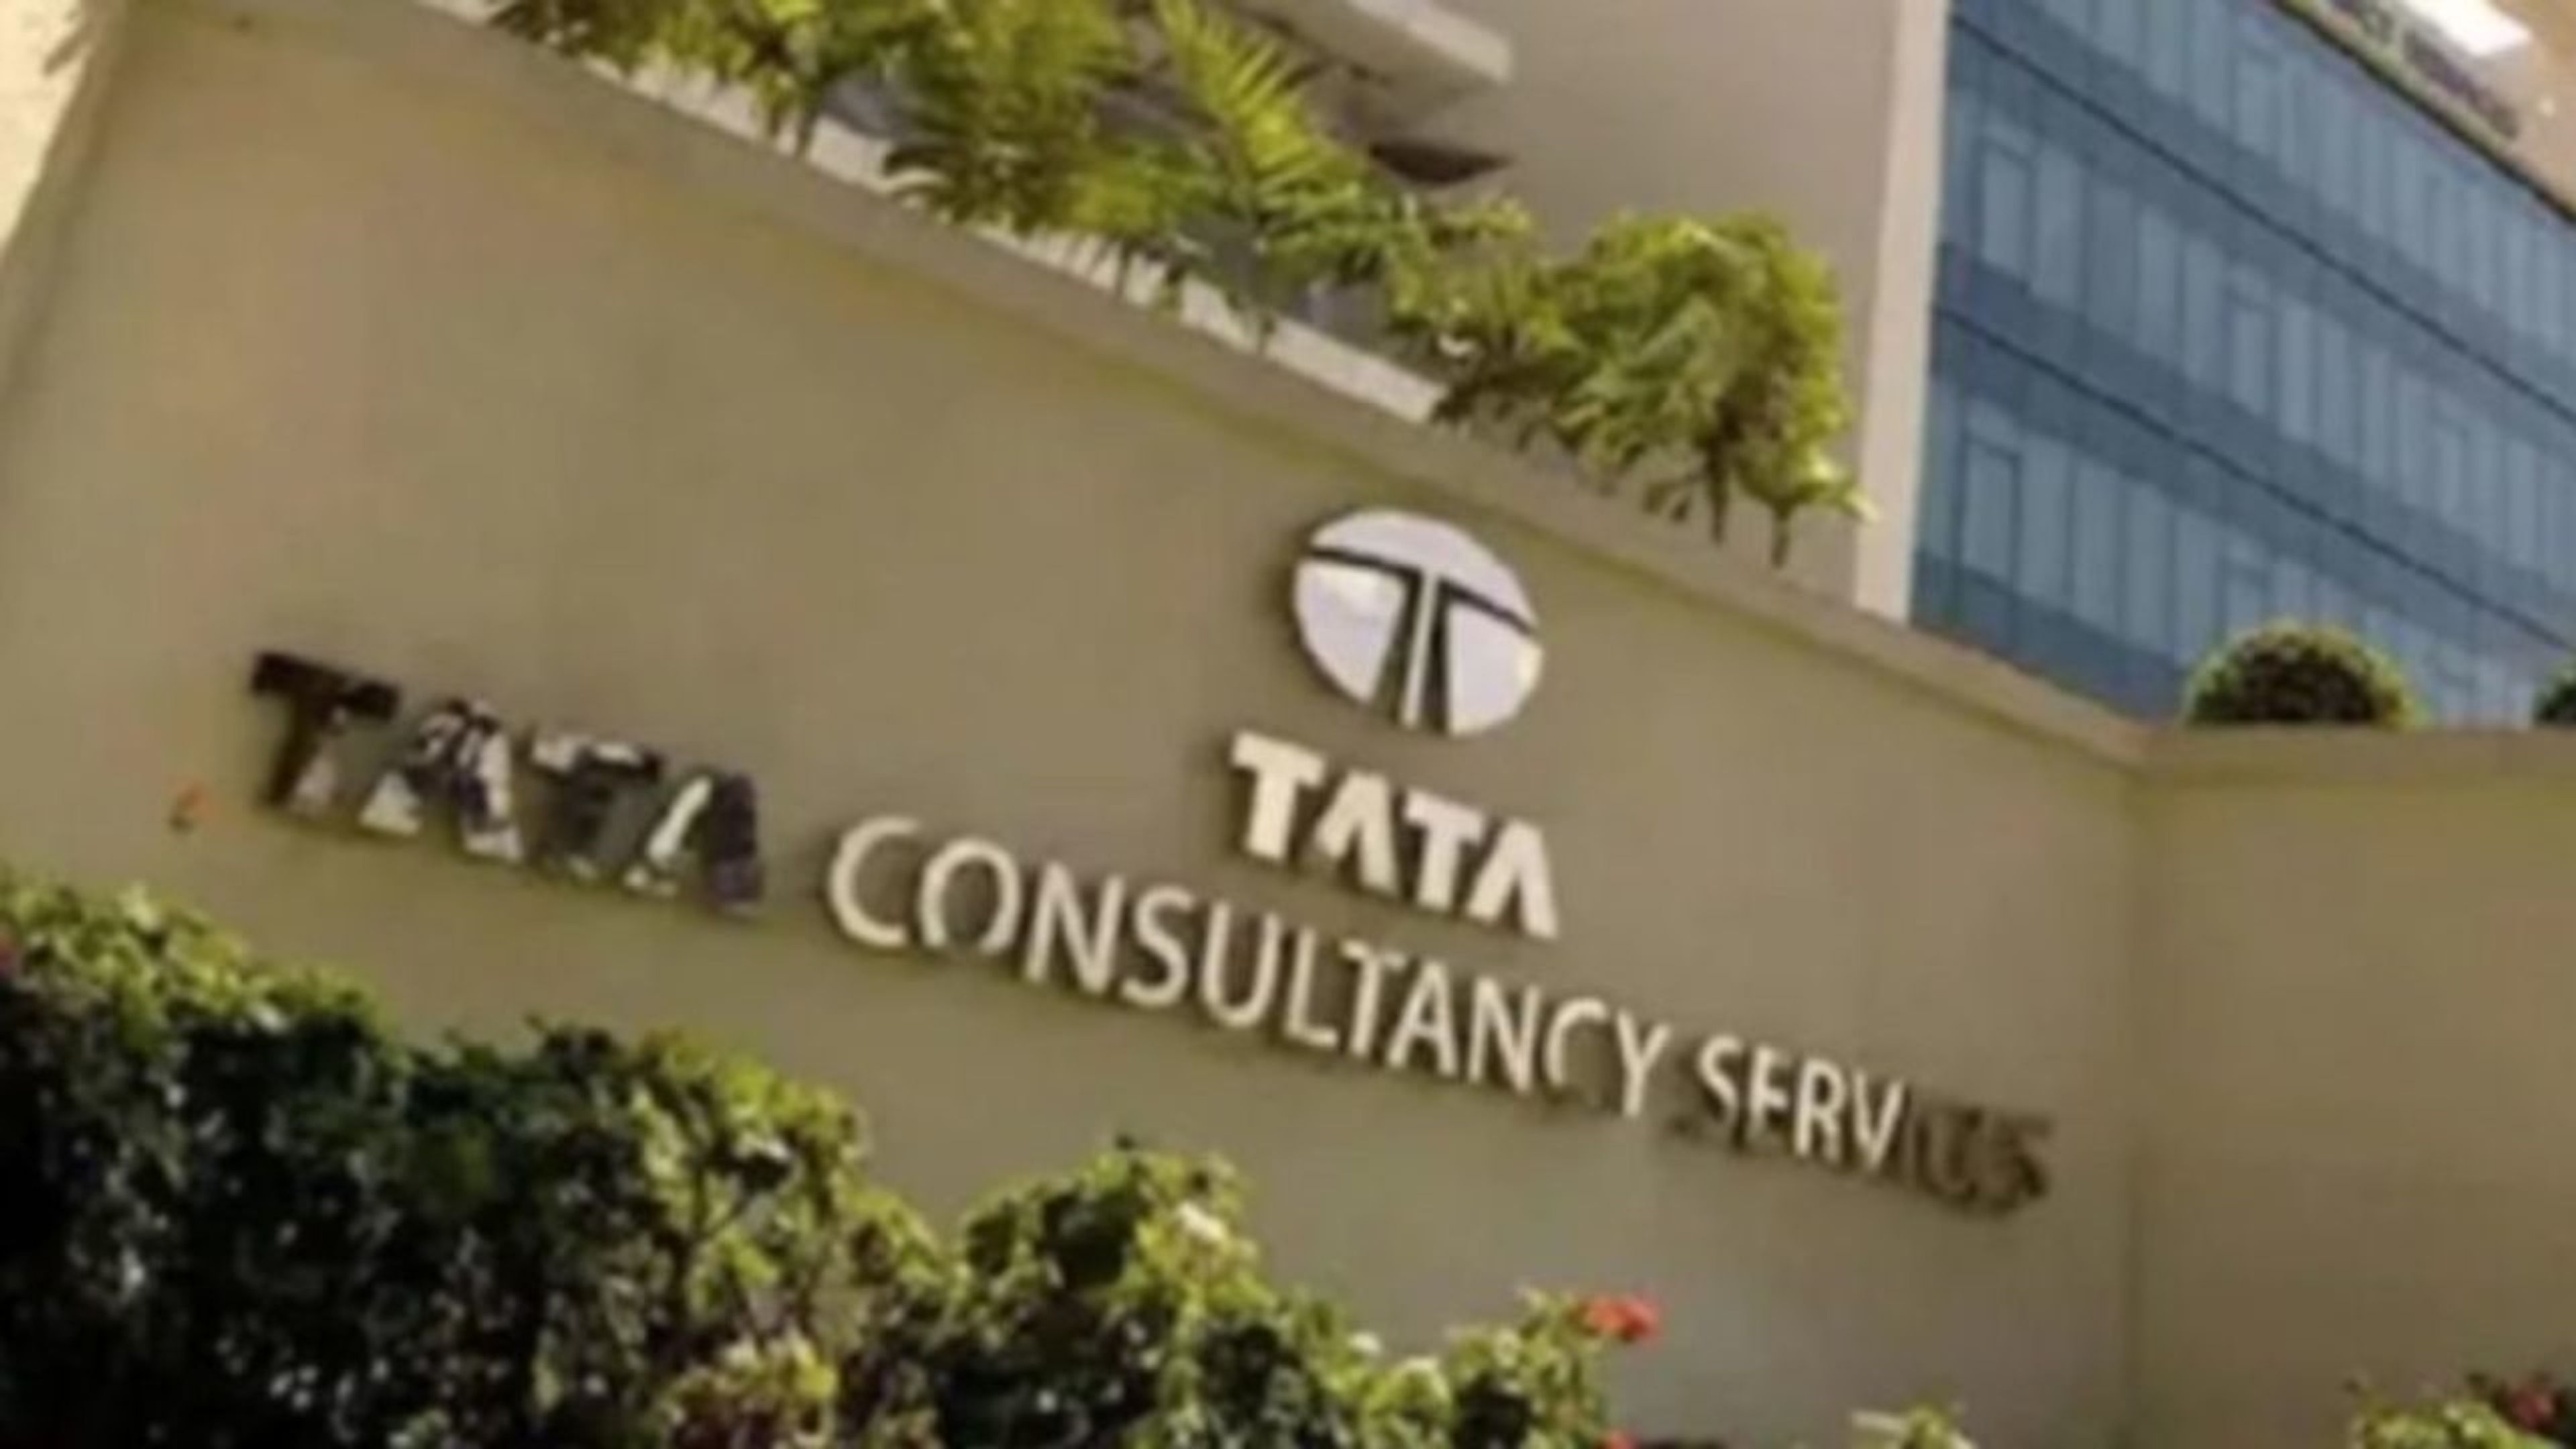 TCS' net profit grows 2% YoY in Q3, strong growth in revenues